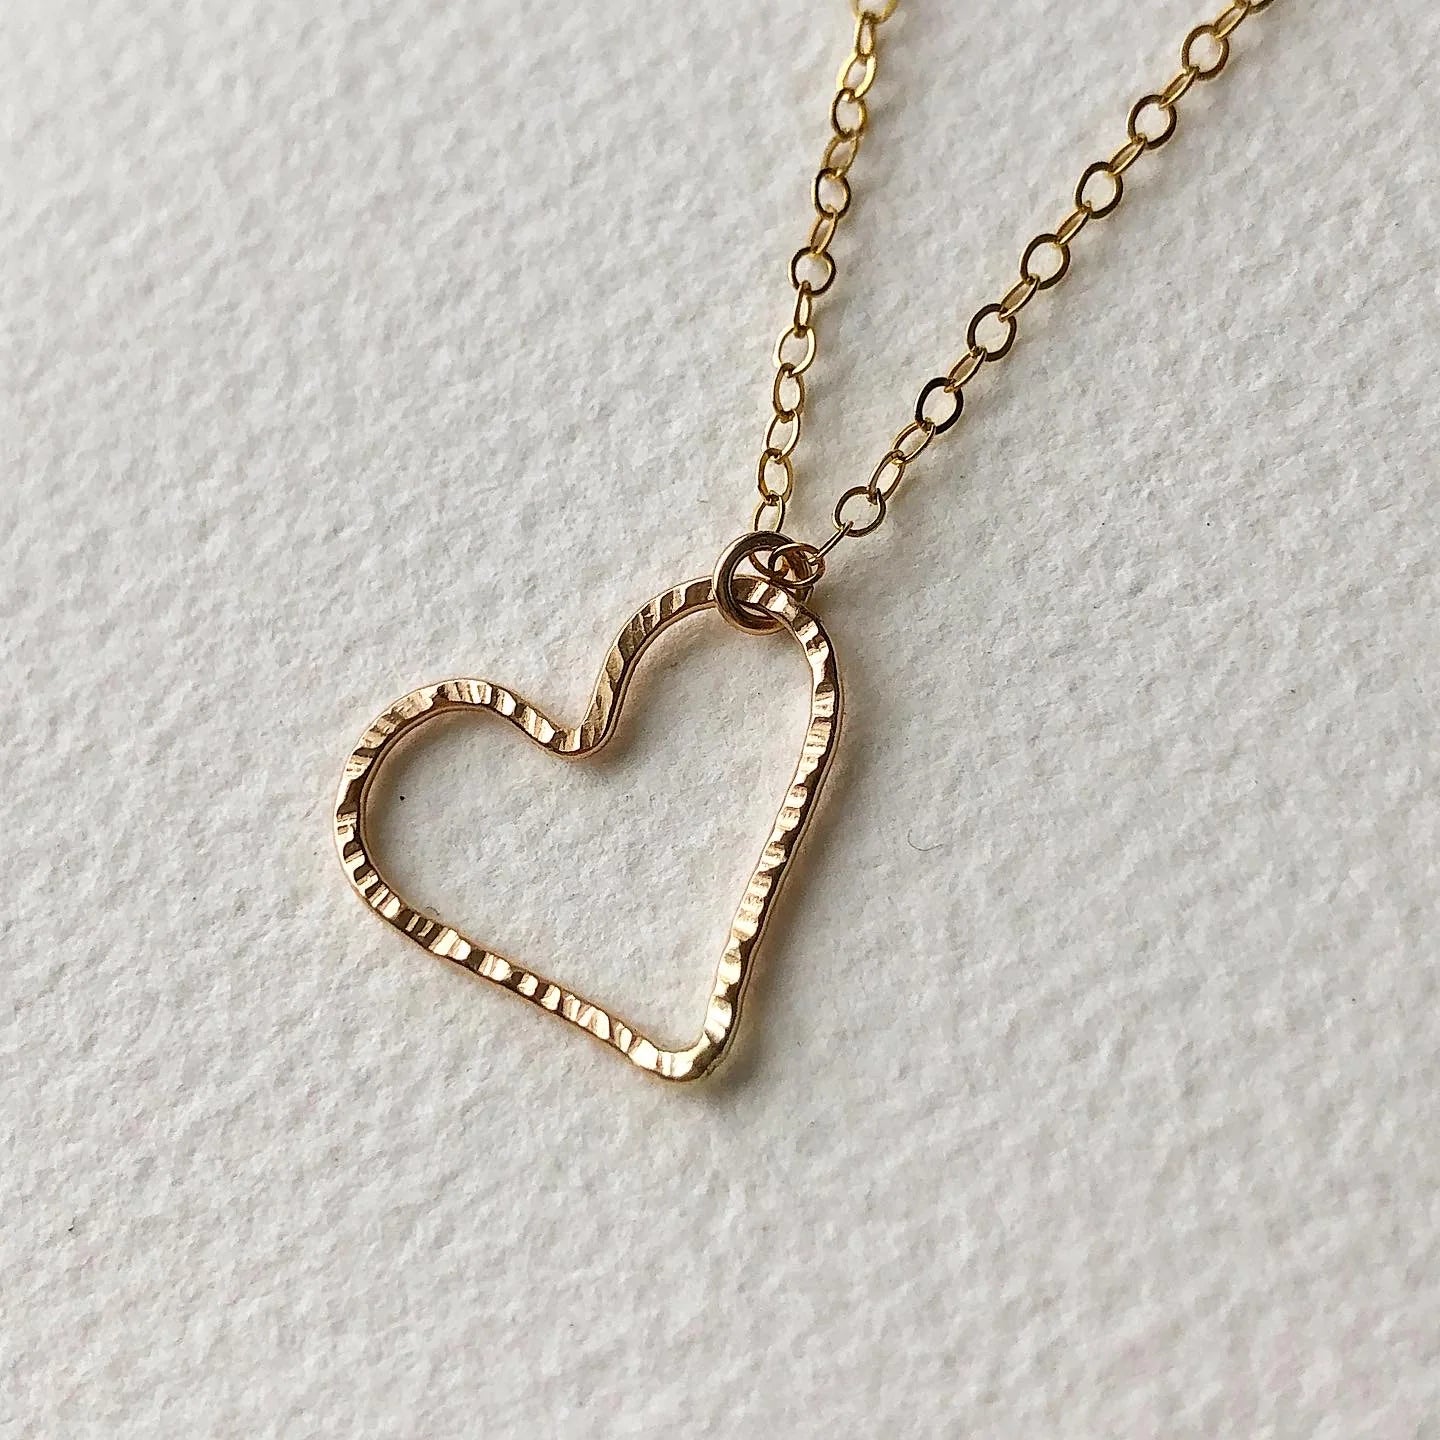 Open-Hearted pendant Necklace